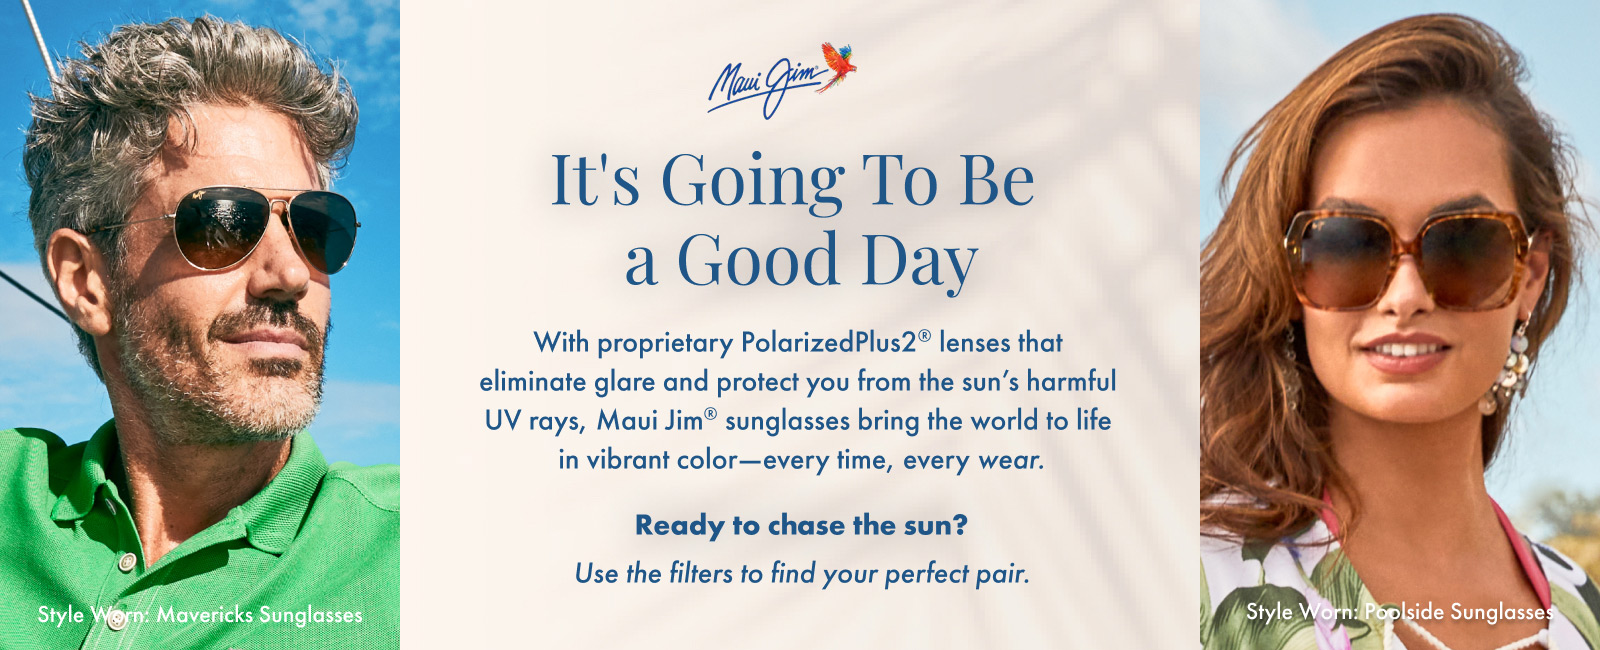 Maui Jim: It's Going To Be a Good Day